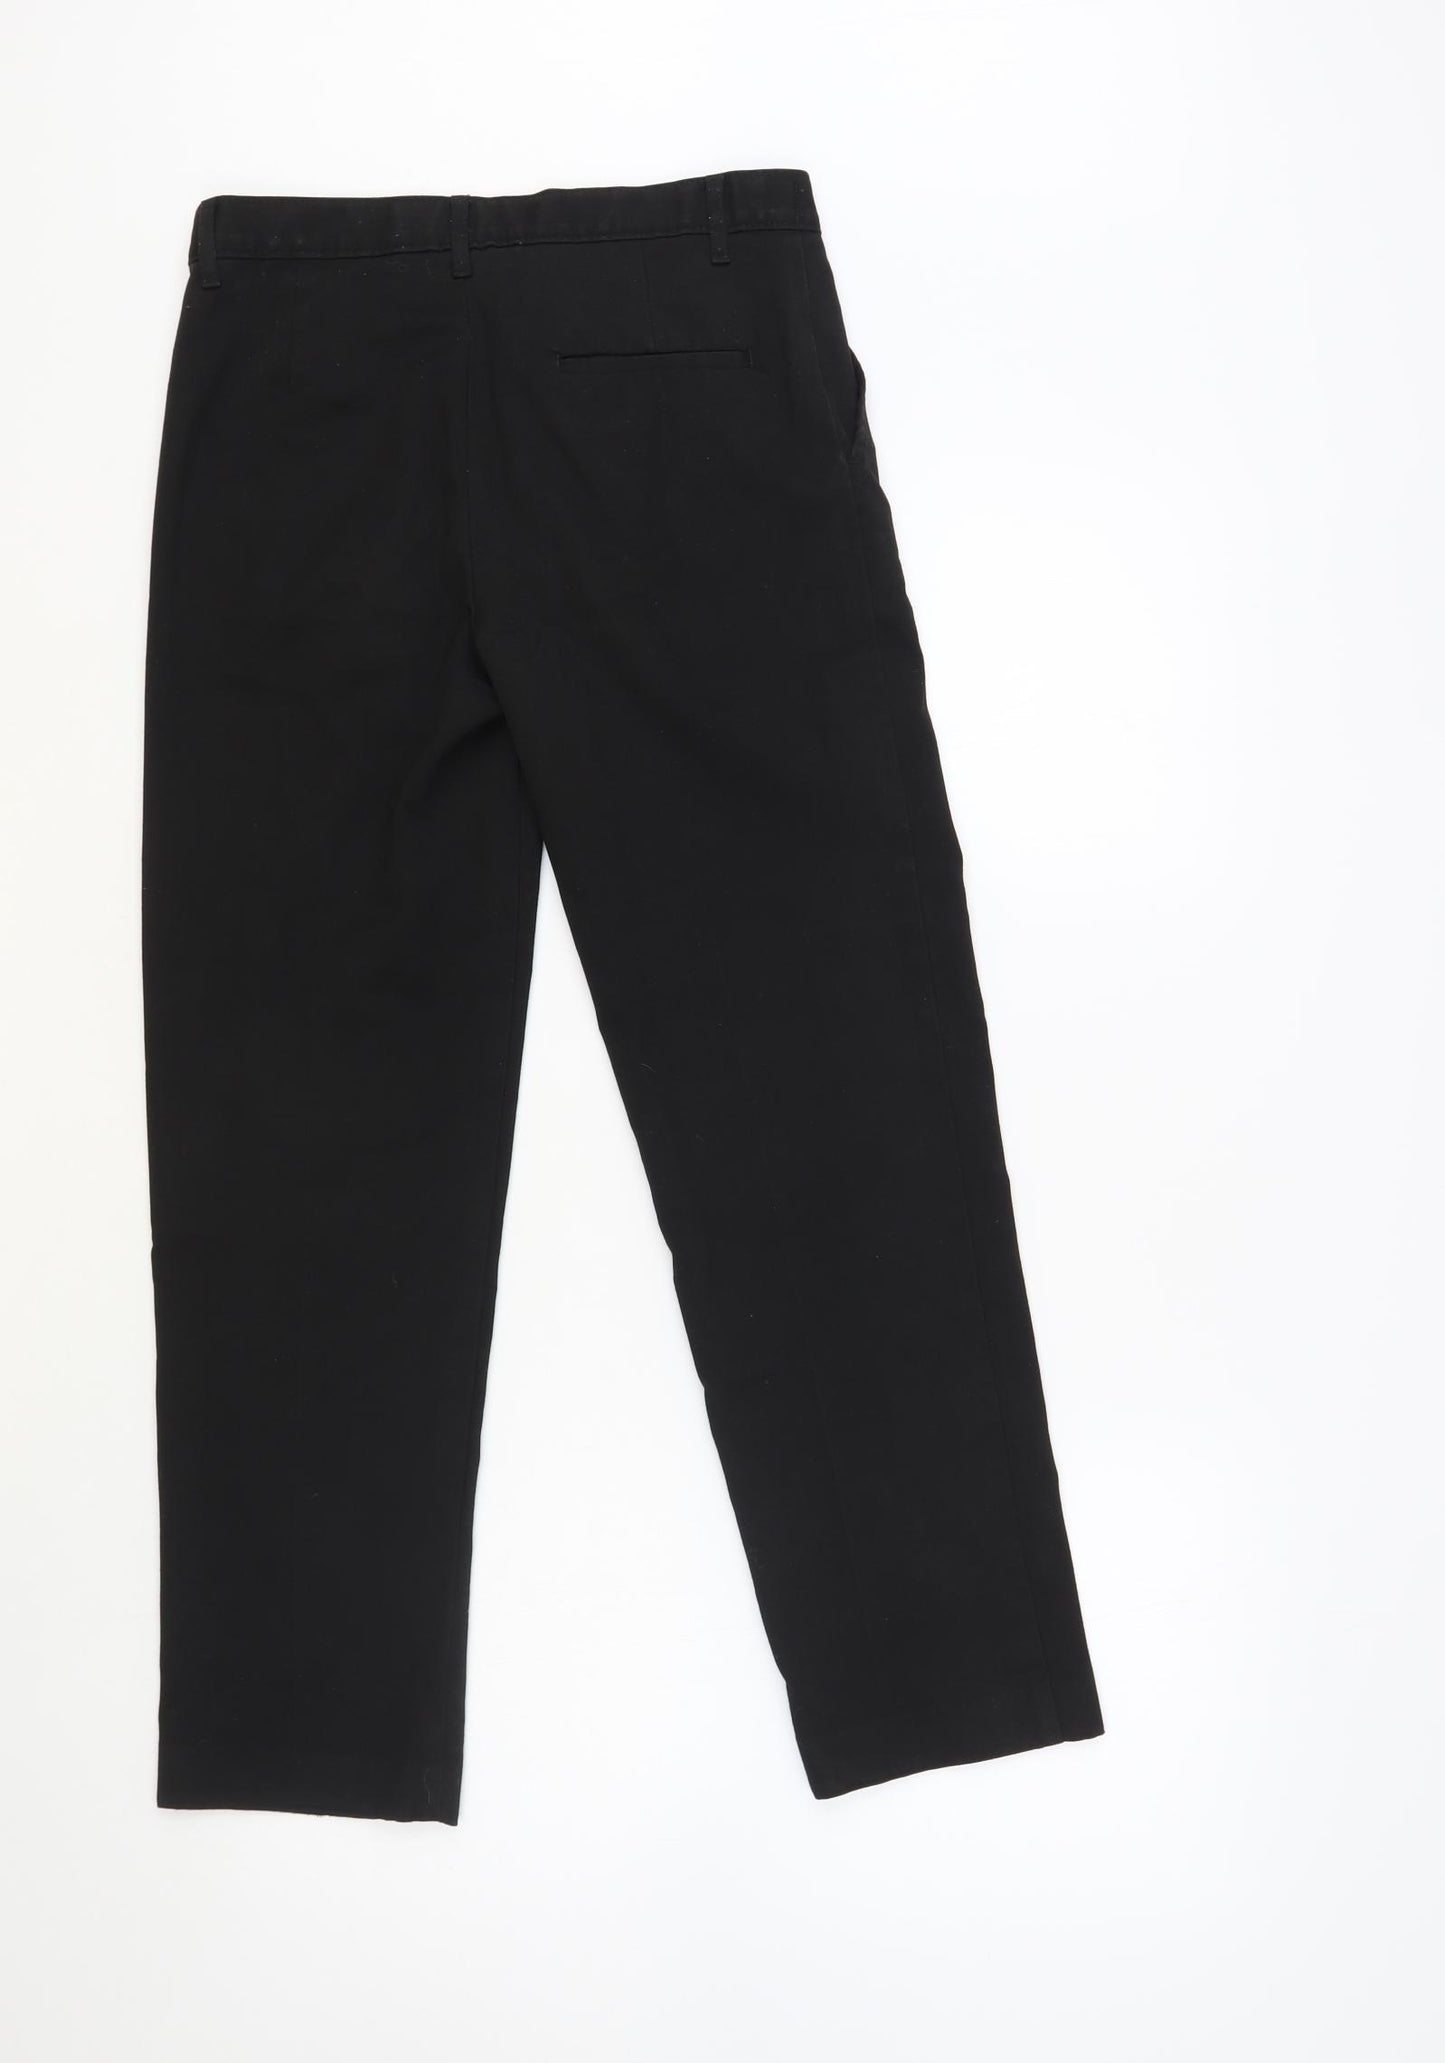 Dunnes Stores Boys Black Polyester Chino Trousers Size 11-12 Years Regular Hook & Loop - Schoolwear